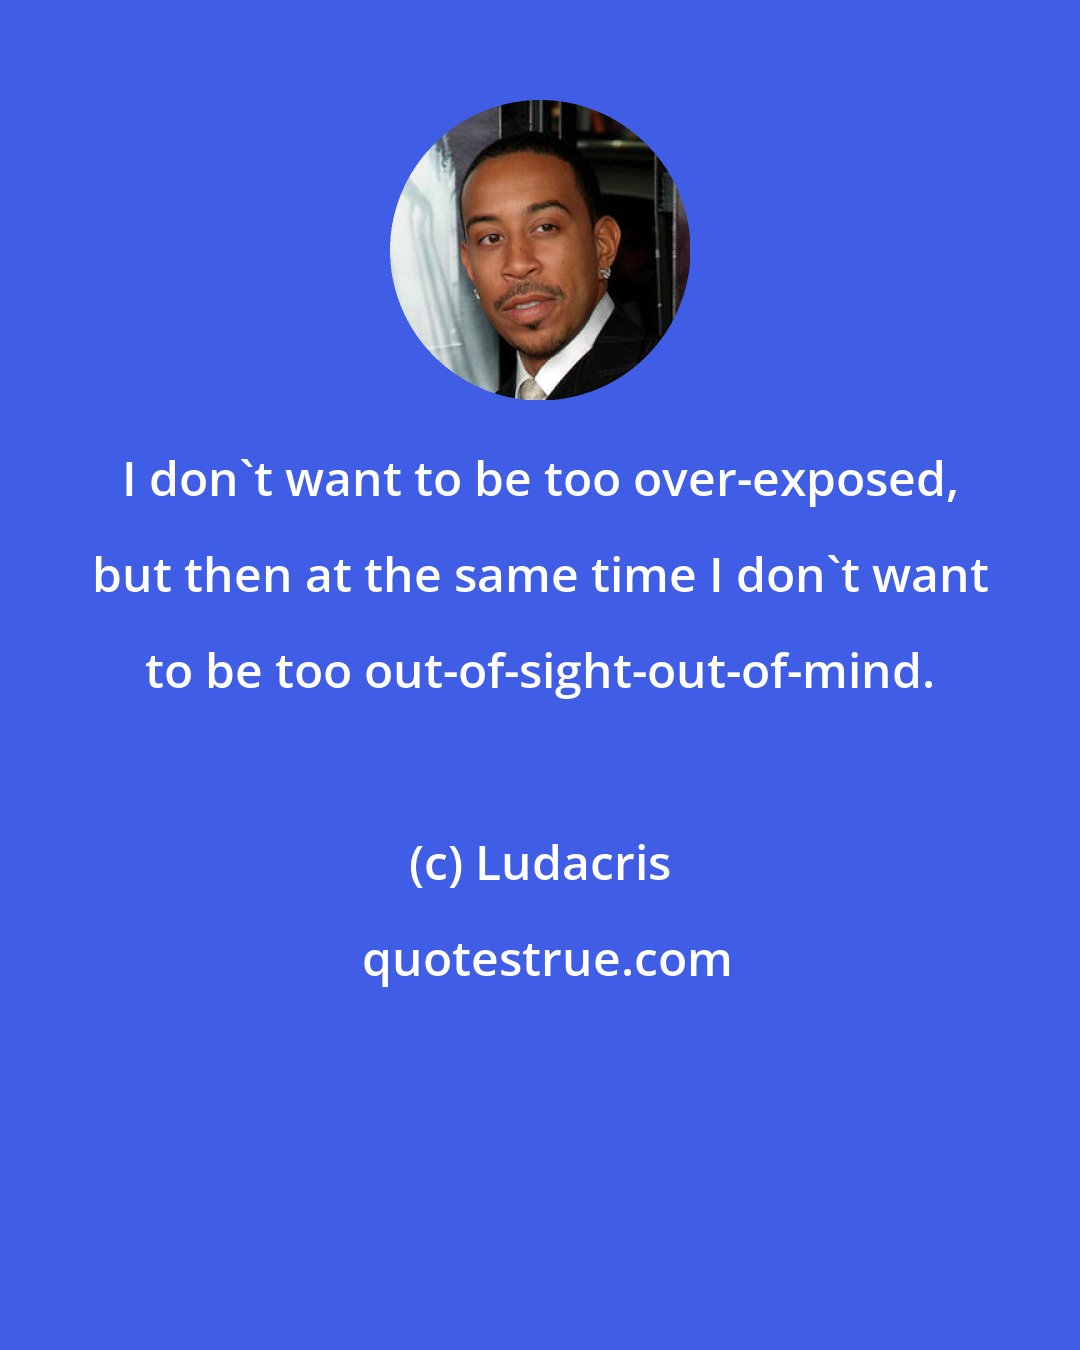 Ludacris: I don't want to be too over-exposed, but then at the same time I don't want to be too out-of-sight-out-of-mind.